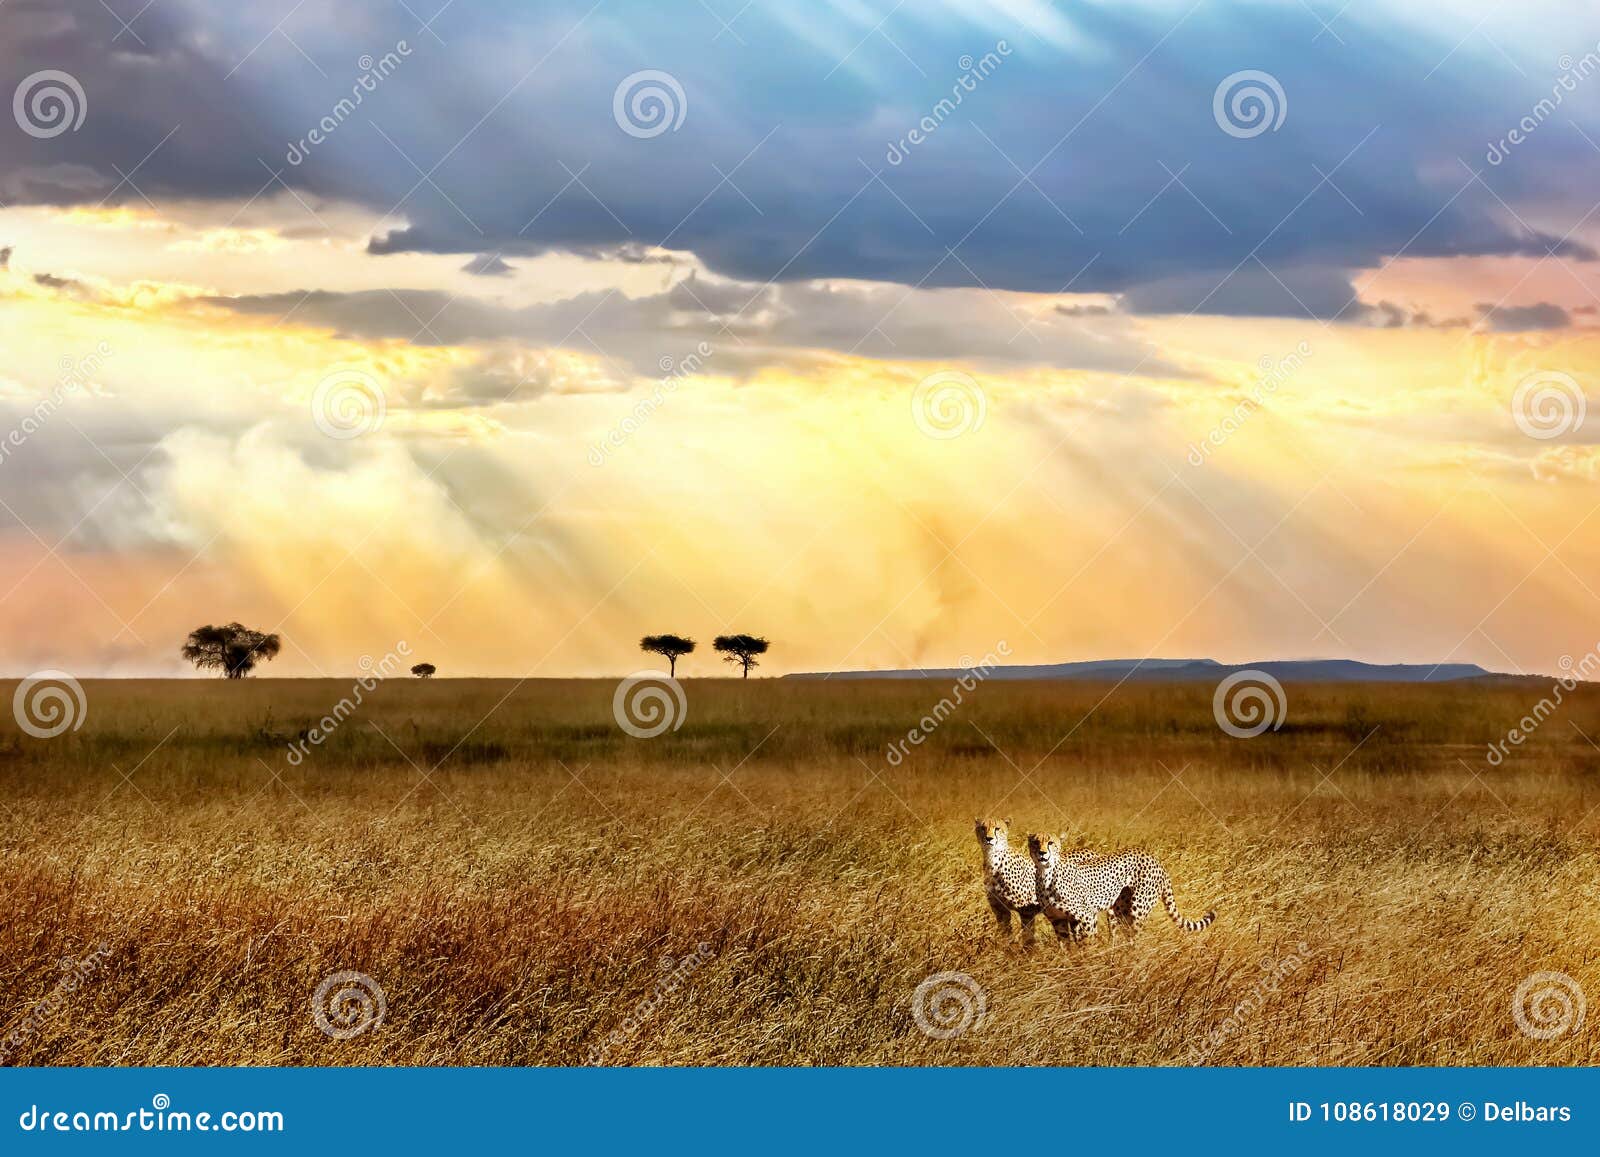 cheetahs against a beautiful sky at sunset in serengeti national park. africa.